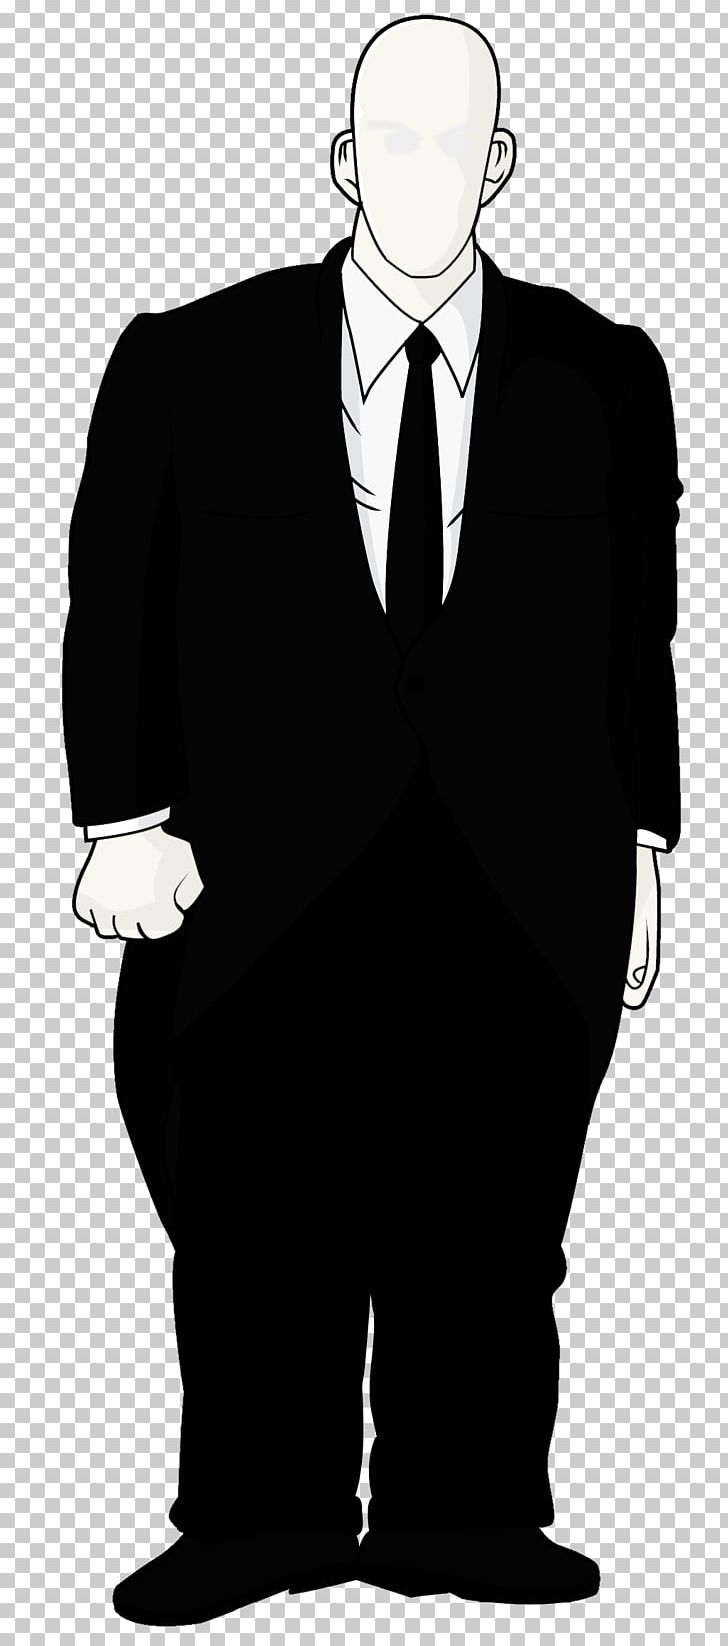 Tuxedo M. Human Behavior Silhouette Business PNG, Clipart, Animals, Behavior, Black And White, Business, Businessperson Free PNG Download